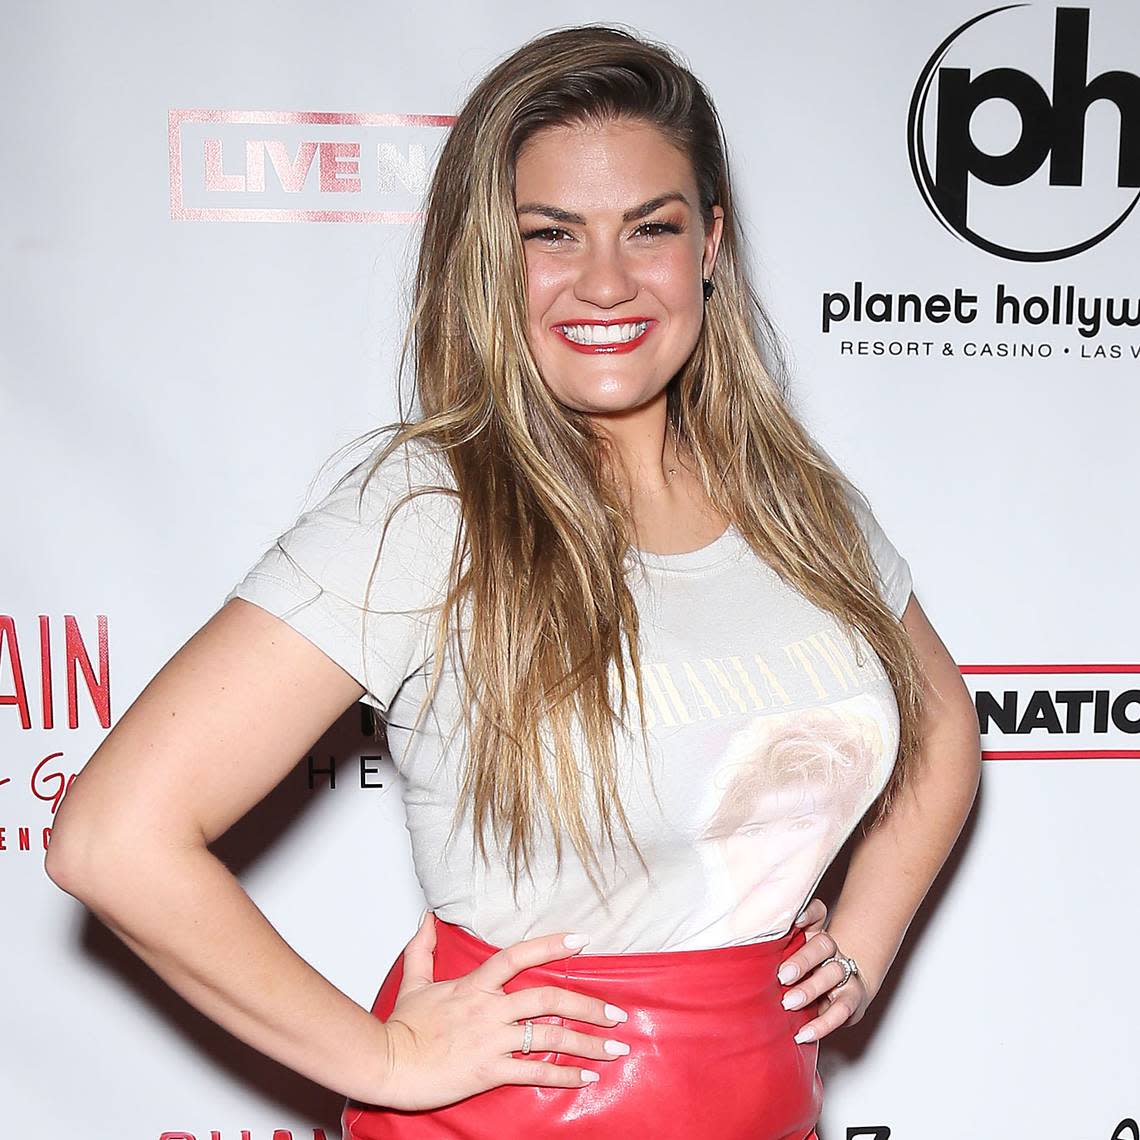 TV personality Brittany Cartwright is from Winchester, Ky. She is known for the Bravo show “Vanderpump Rules” and spin-offs “Jax & Brittany Take Kentucky” and “The Valley.”